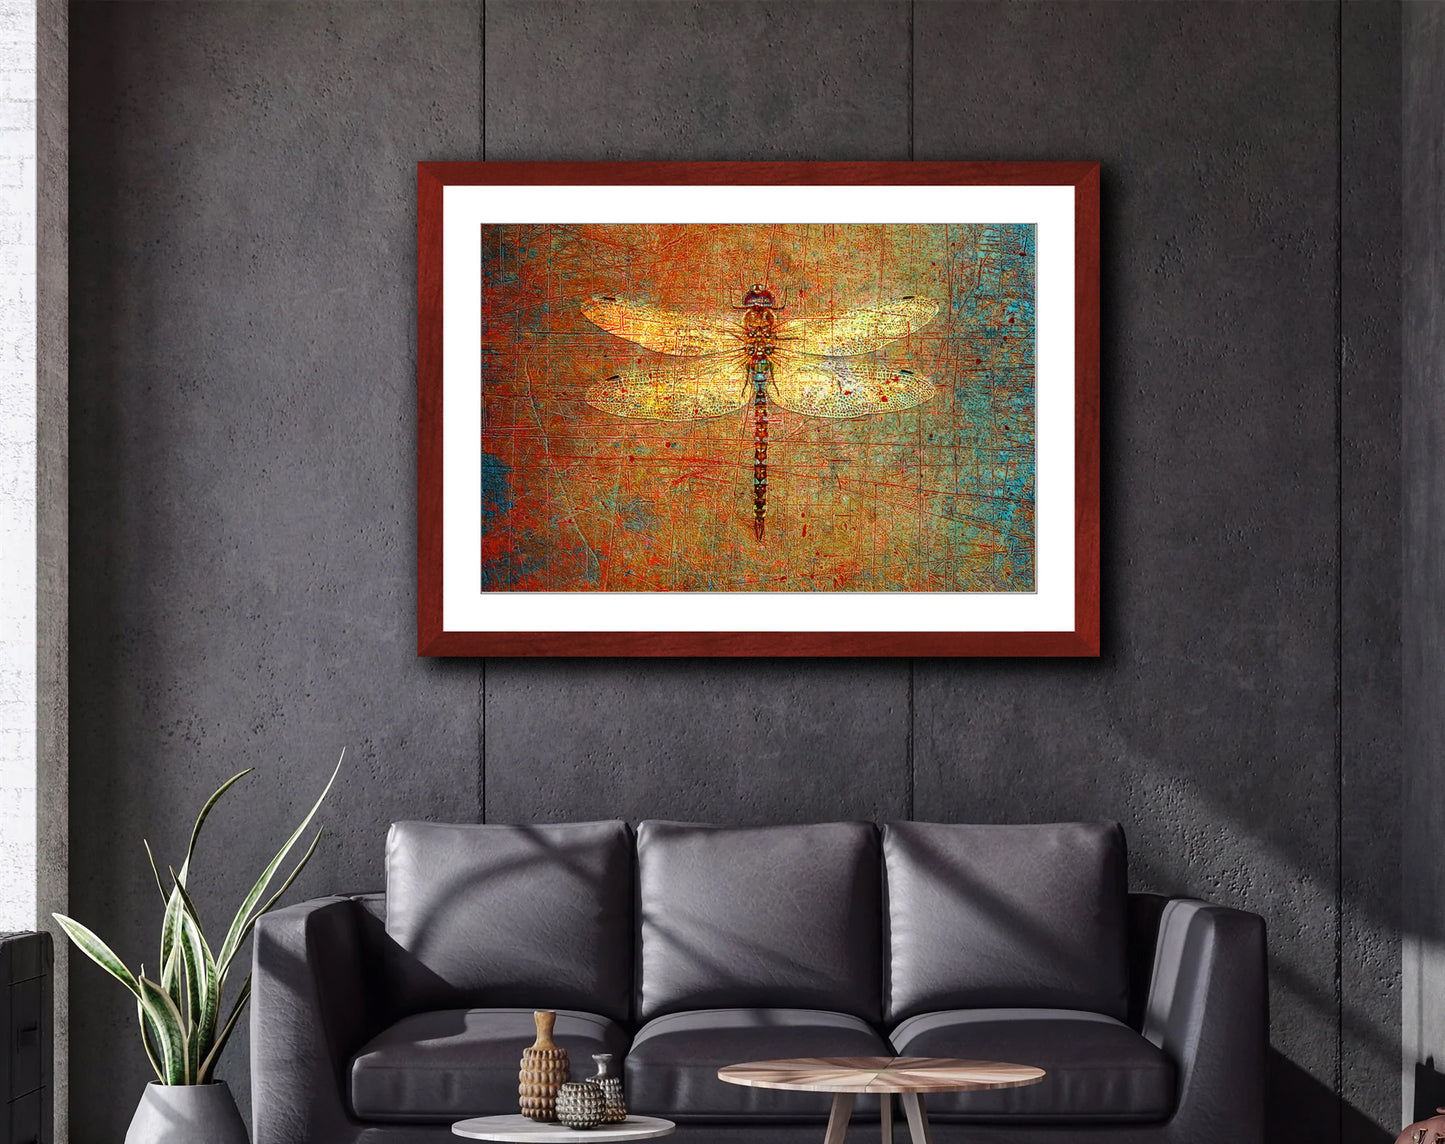 Golden Dragonfly on Distressed Brown Background Framed in a Rectangle Cherry Color Wood Frame hung